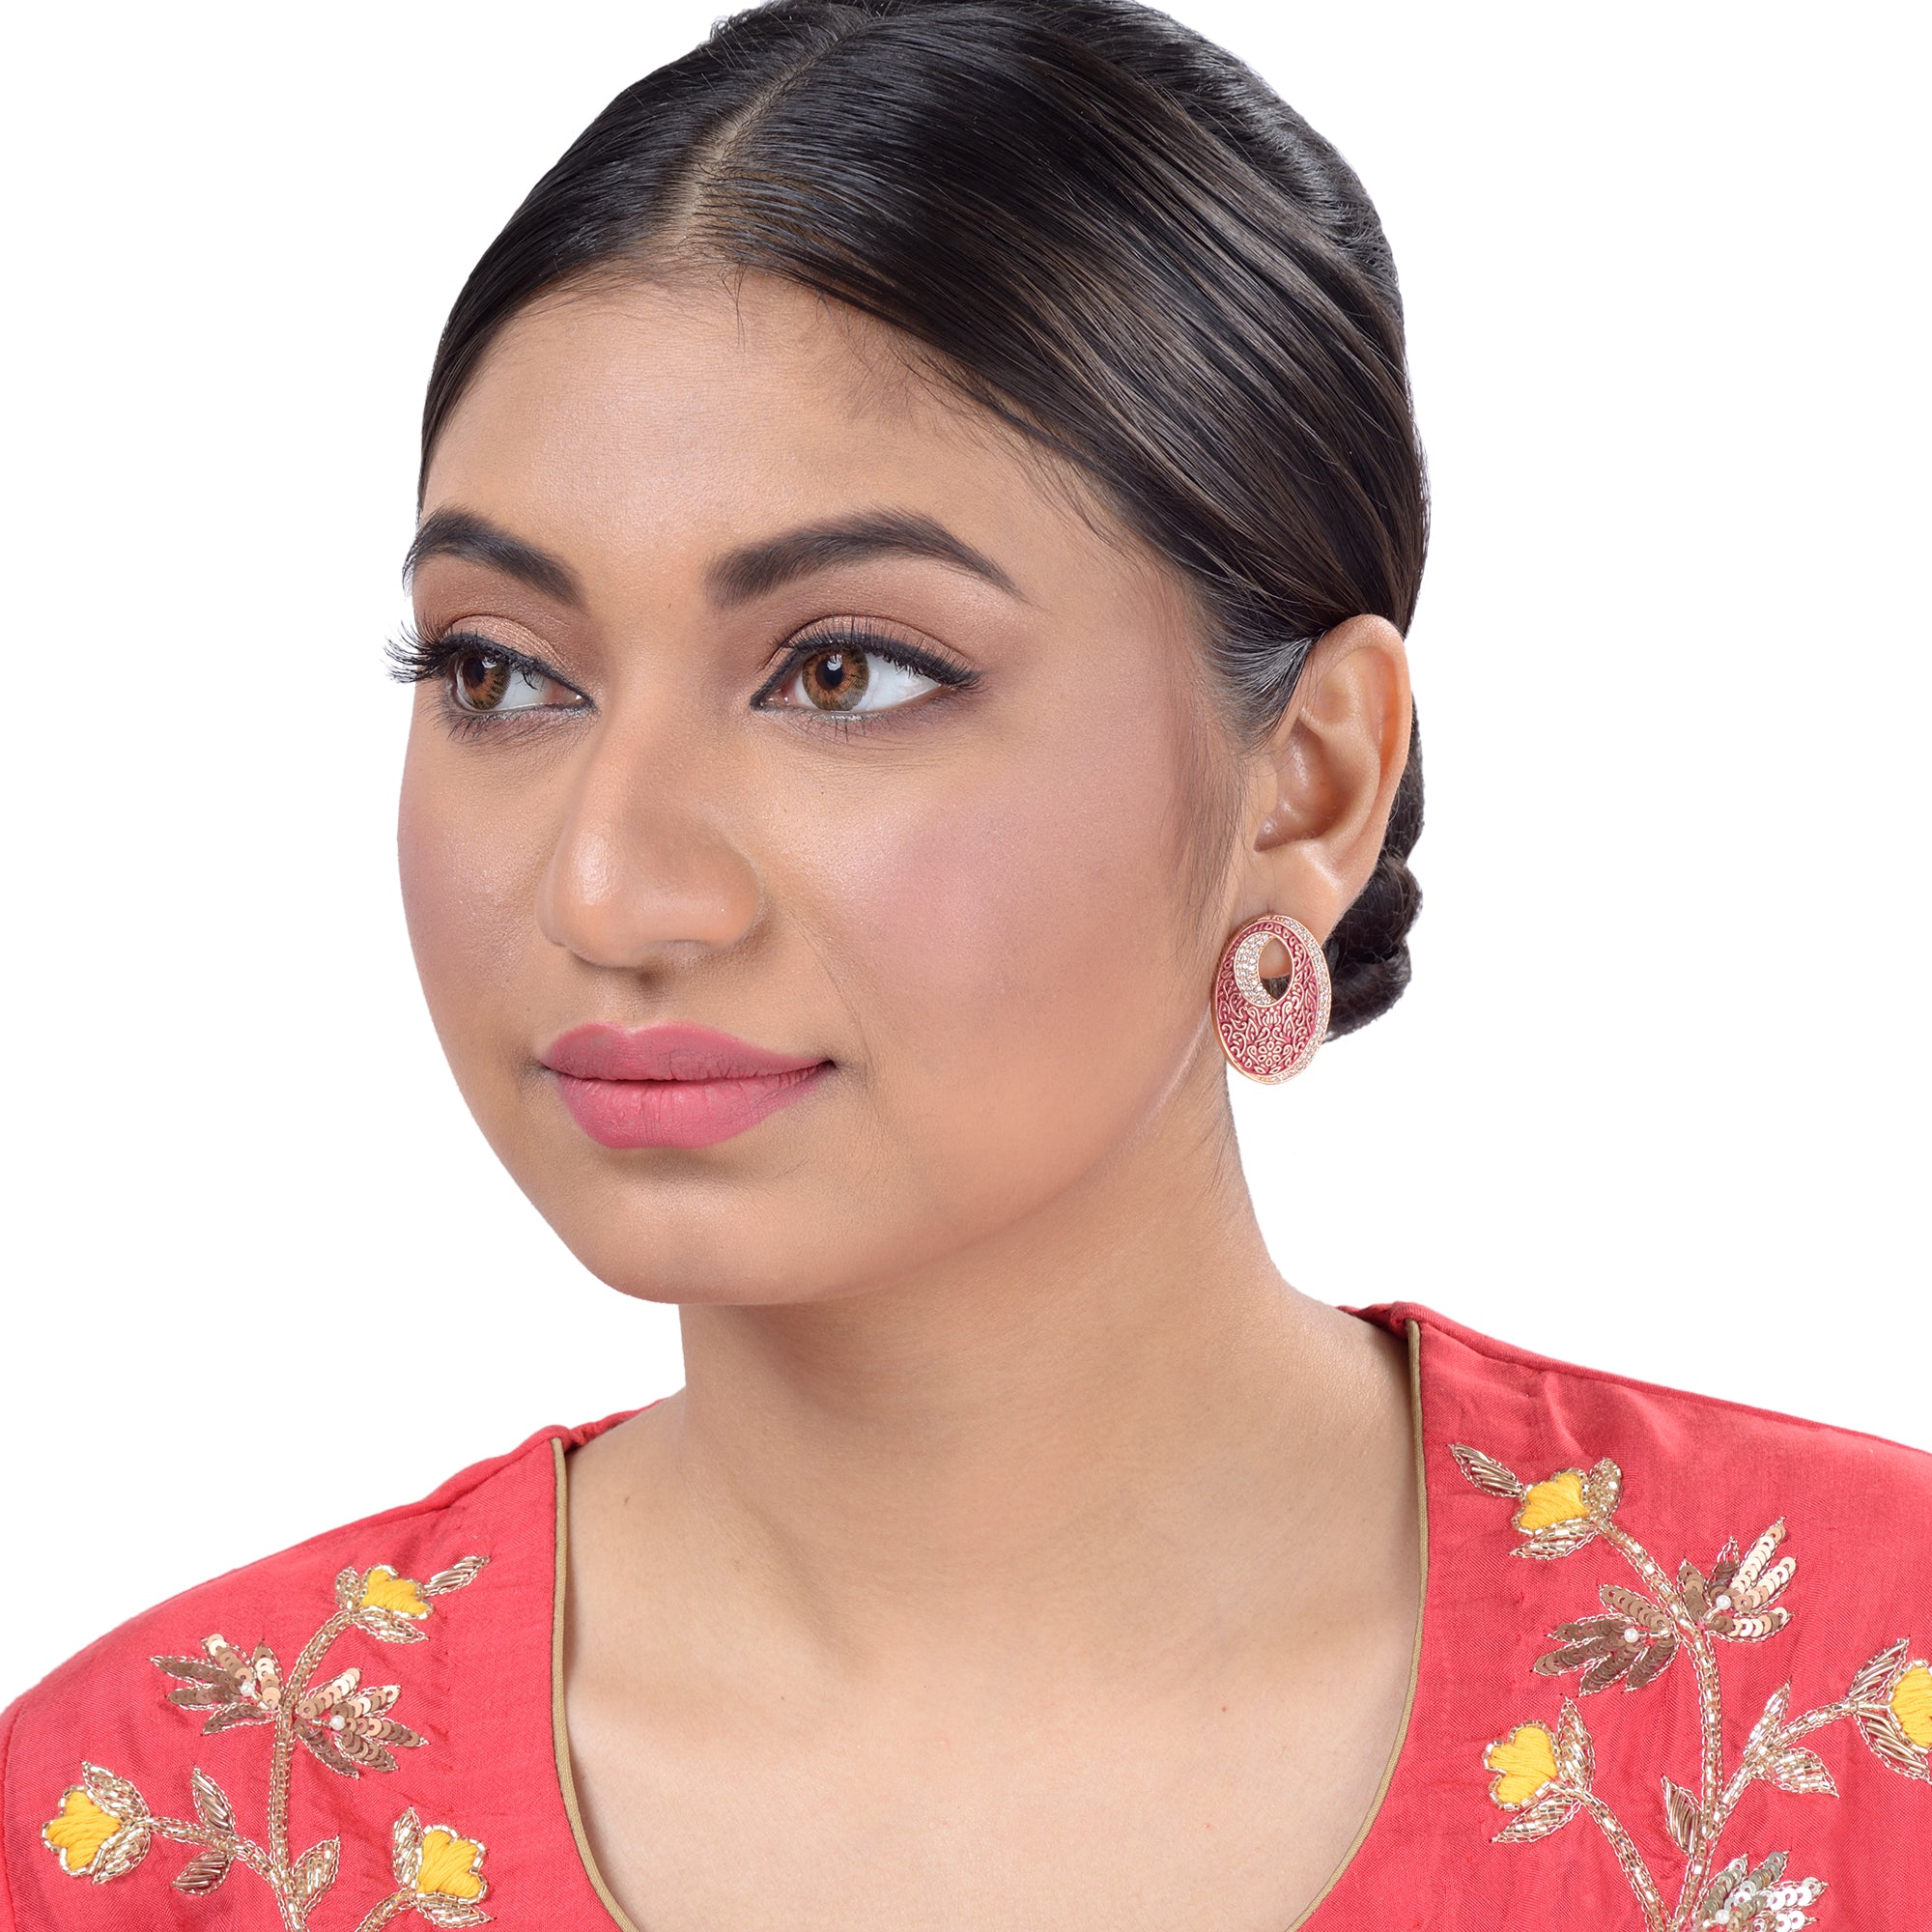 Oval Red Meenakari Small Earrings High Quality Enamelled Rose Gold Plated for Women and Girls - Saraf RS Jewellery